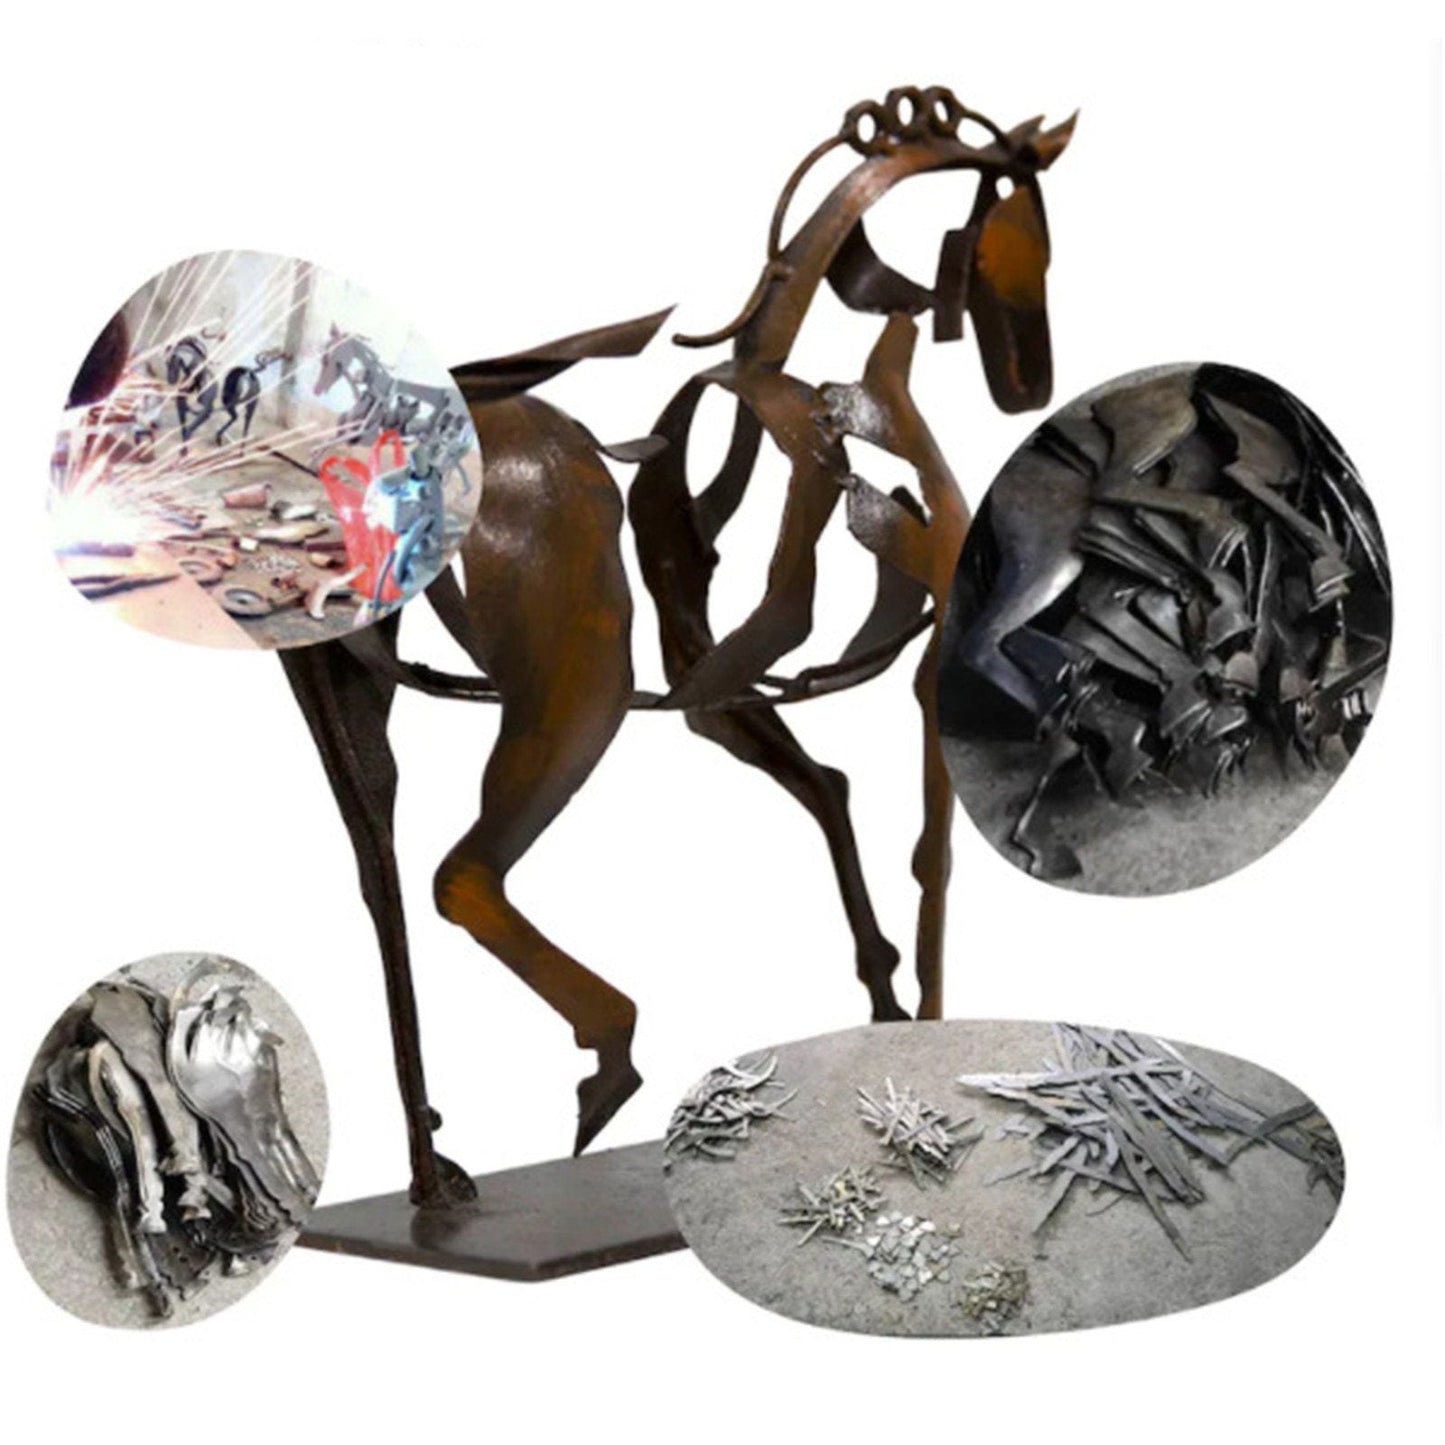 Home Decor Metal Horse Sculpture Adonis Three-dimensional Openwork Abstract Vintage Desktop Office Decor Christmas Ornaments